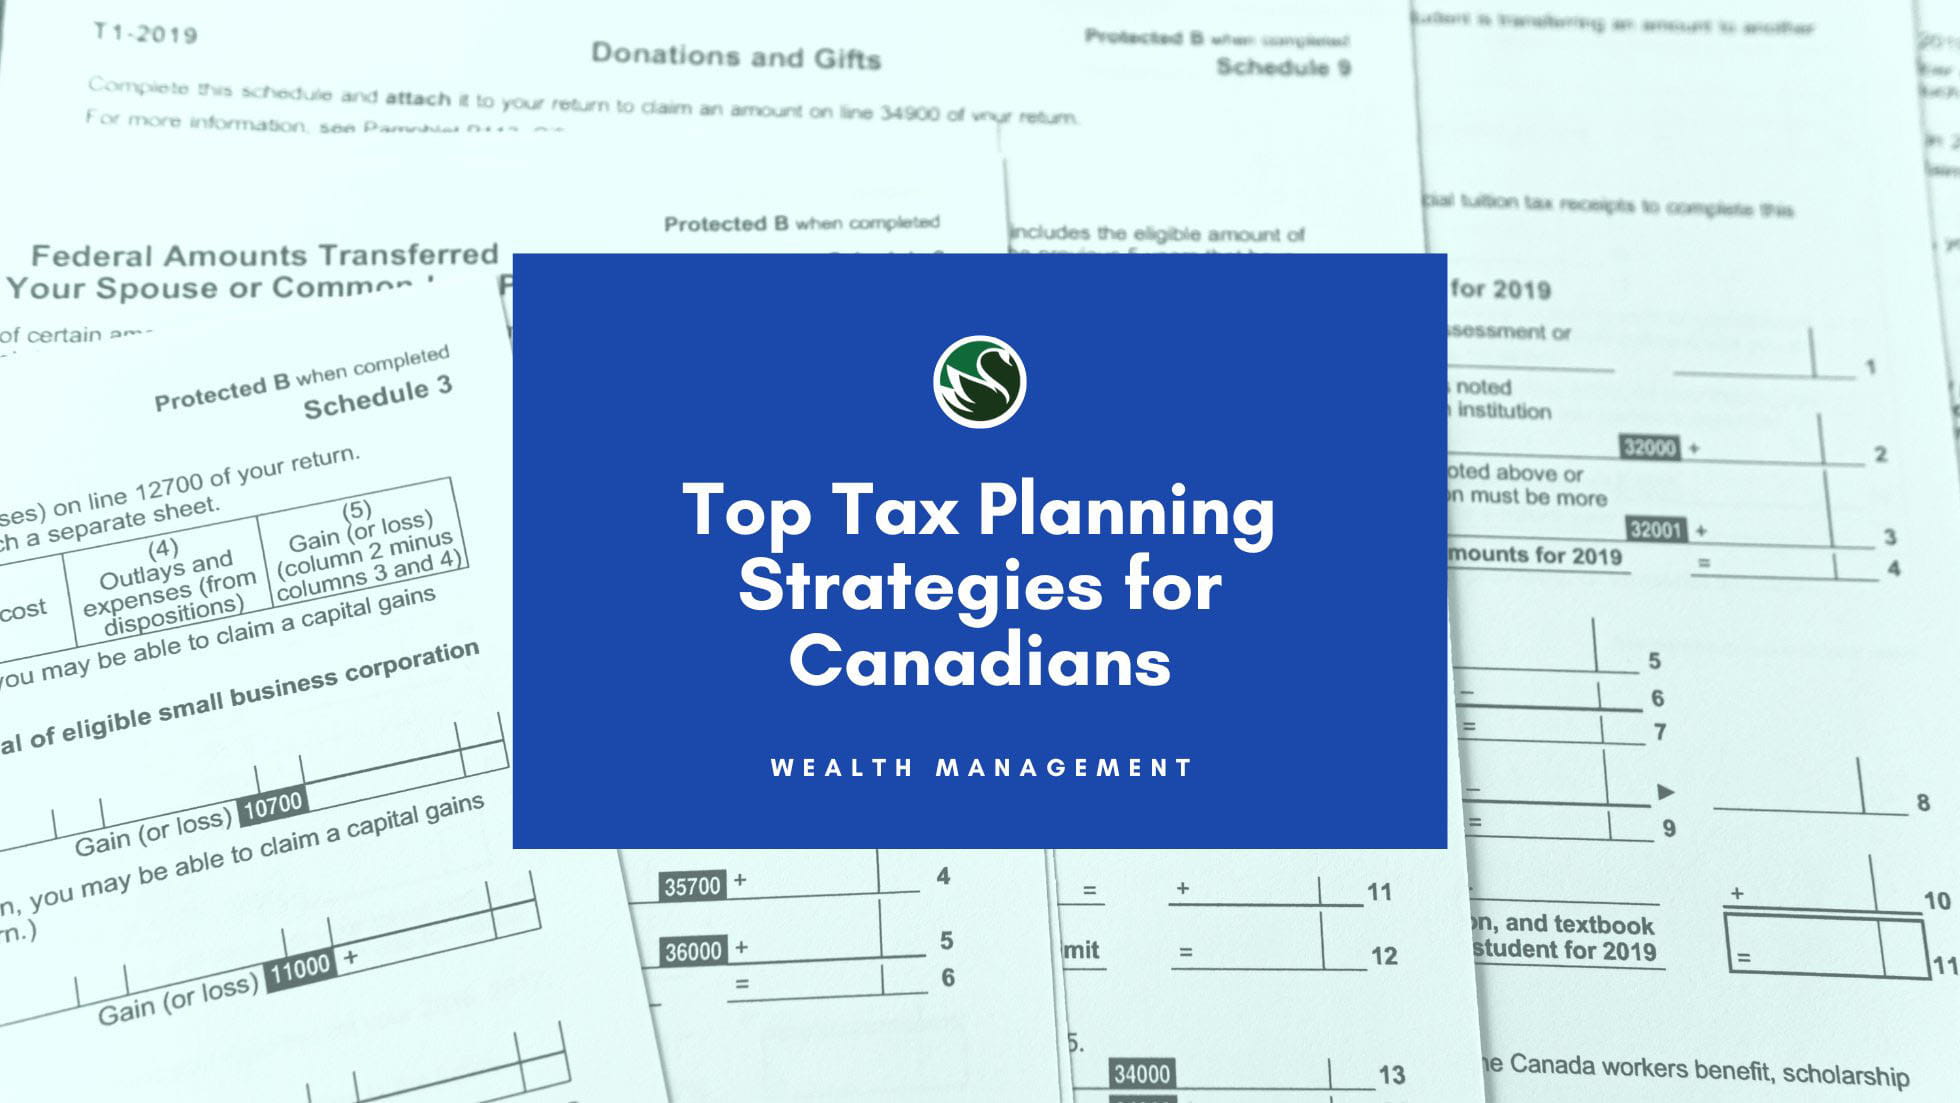 Top Tax Planning Strategies for Canadians